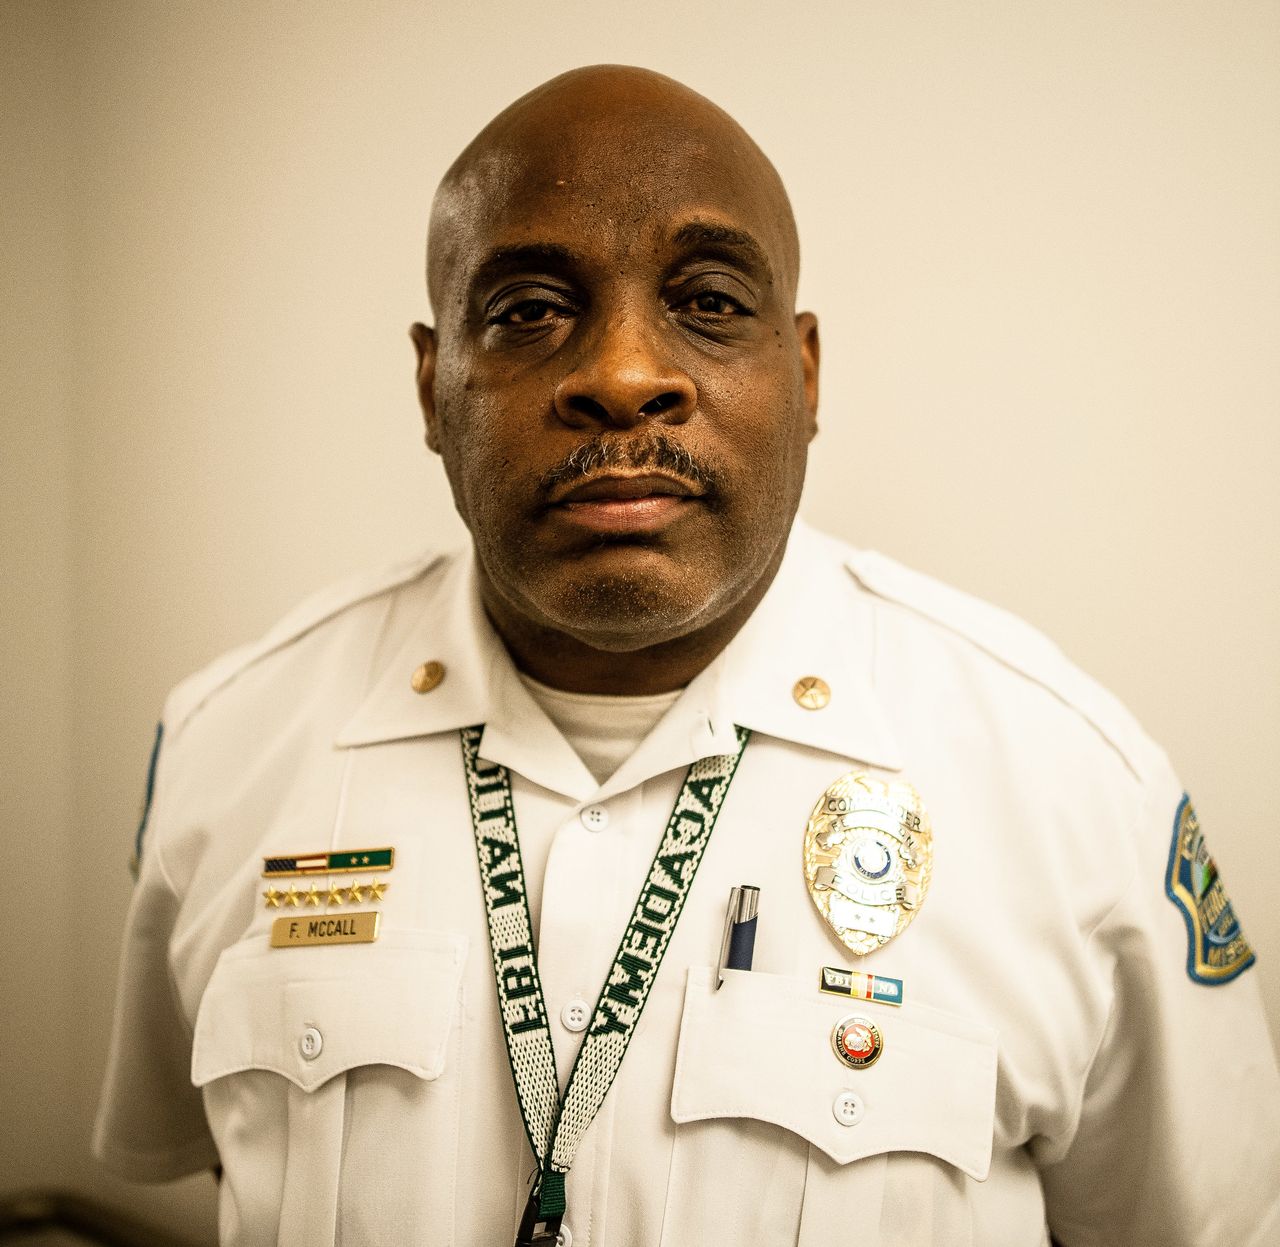 Frank McCall, a police commander in Ferguson, has overseen progress on the consent decree.